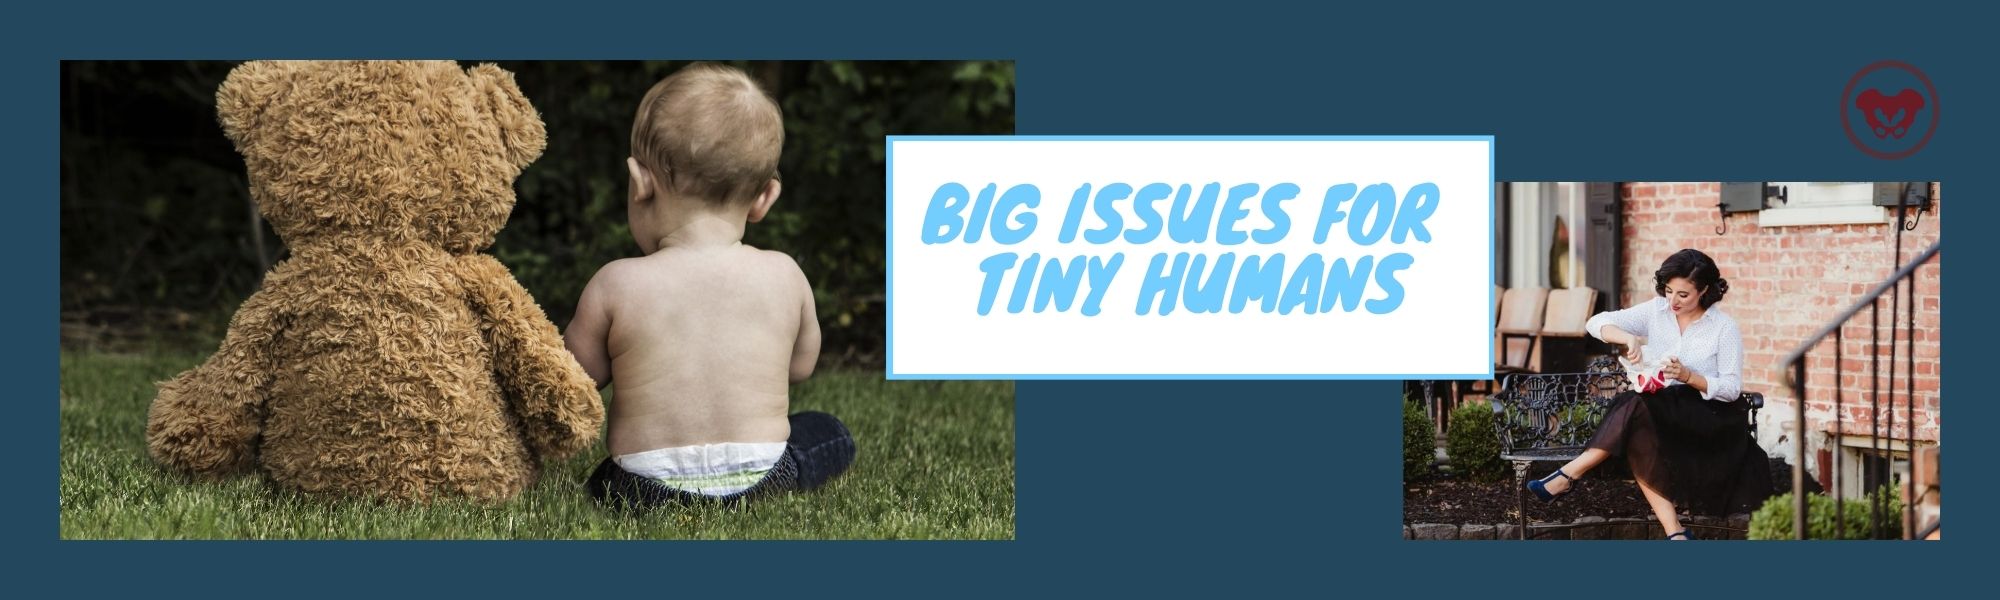 Big Issues for Tiny Humans